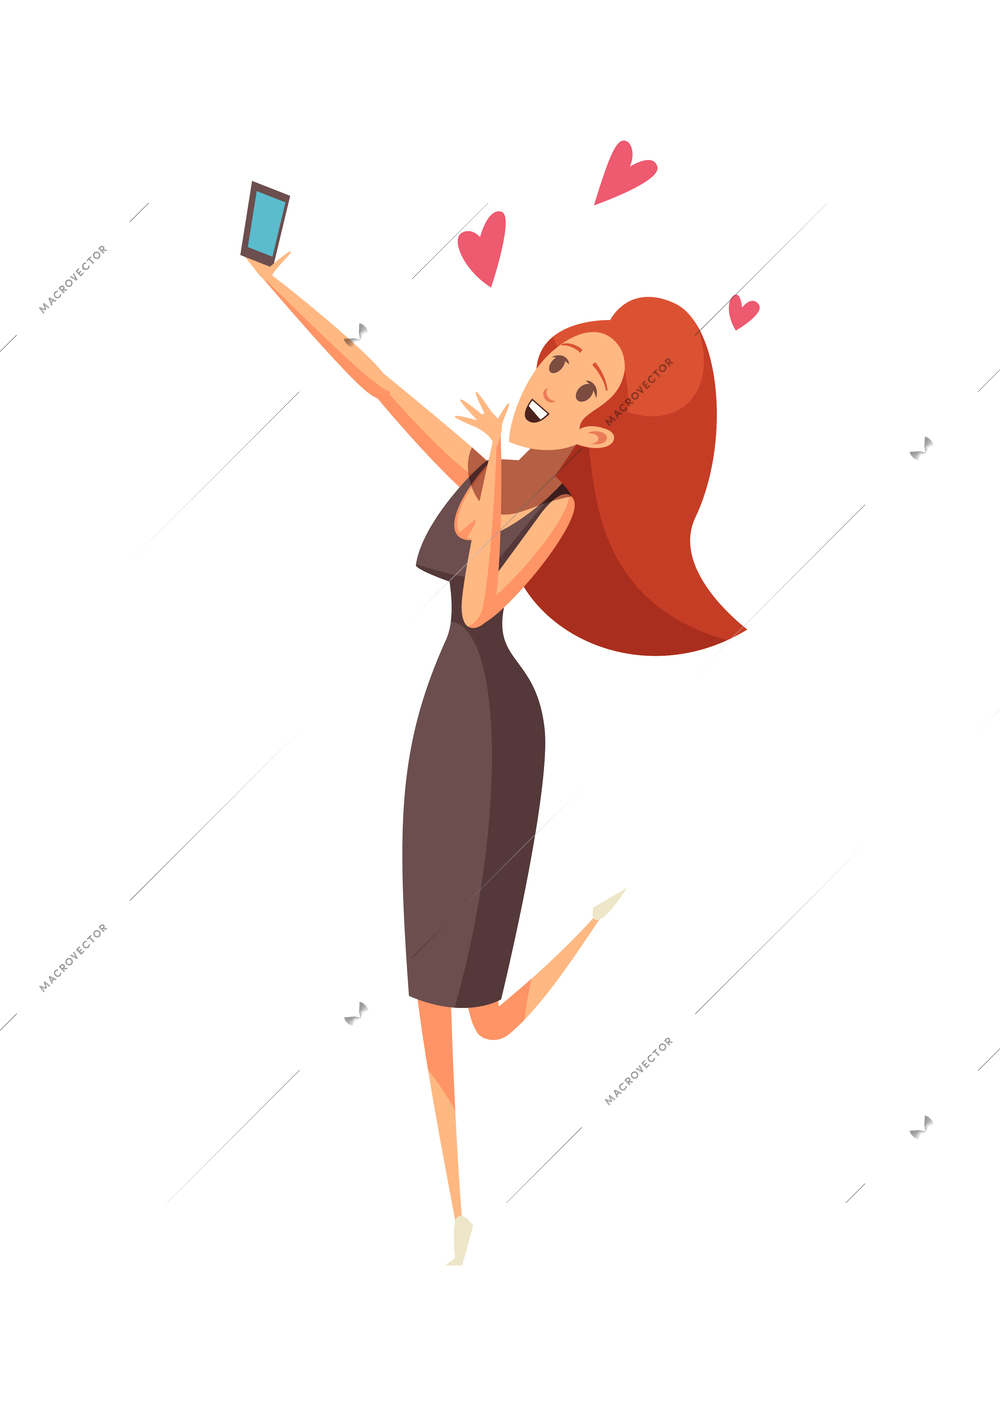 Virtual love flat icon with happy woman chatting with man on smartphone taking selfie vector illustration